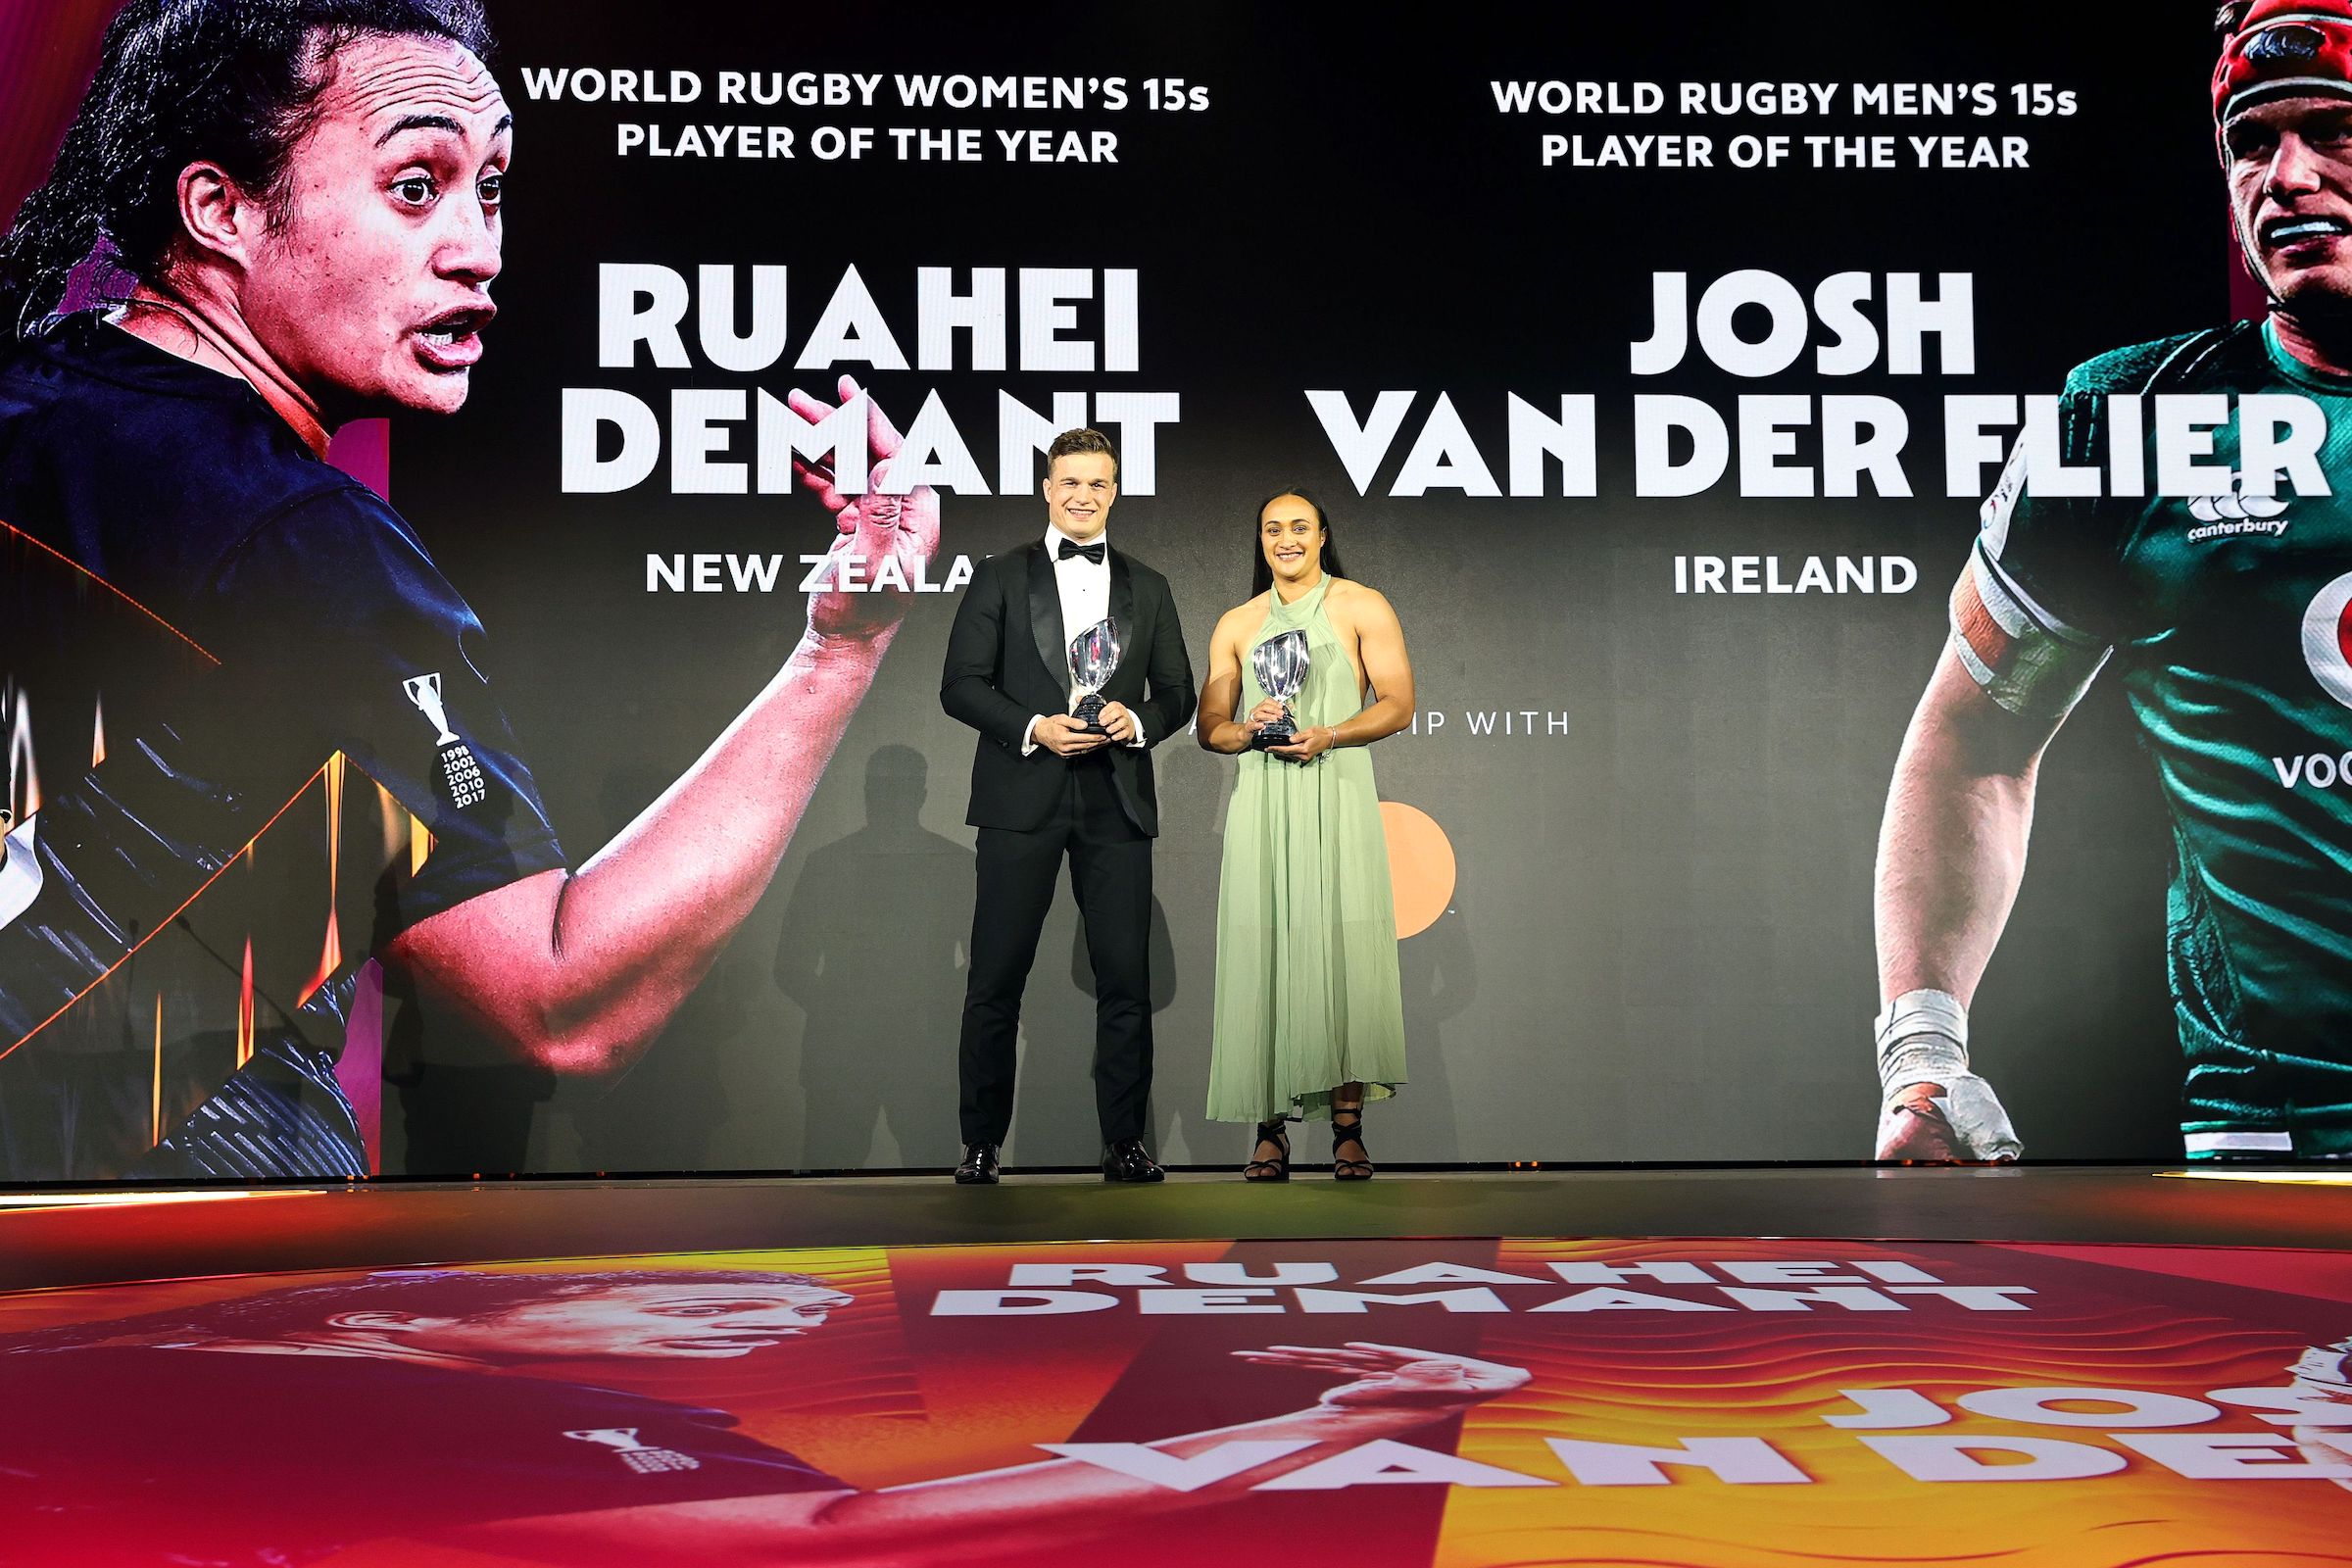 Josh van der flier and ruahei demant named world rugby players of the year 2022